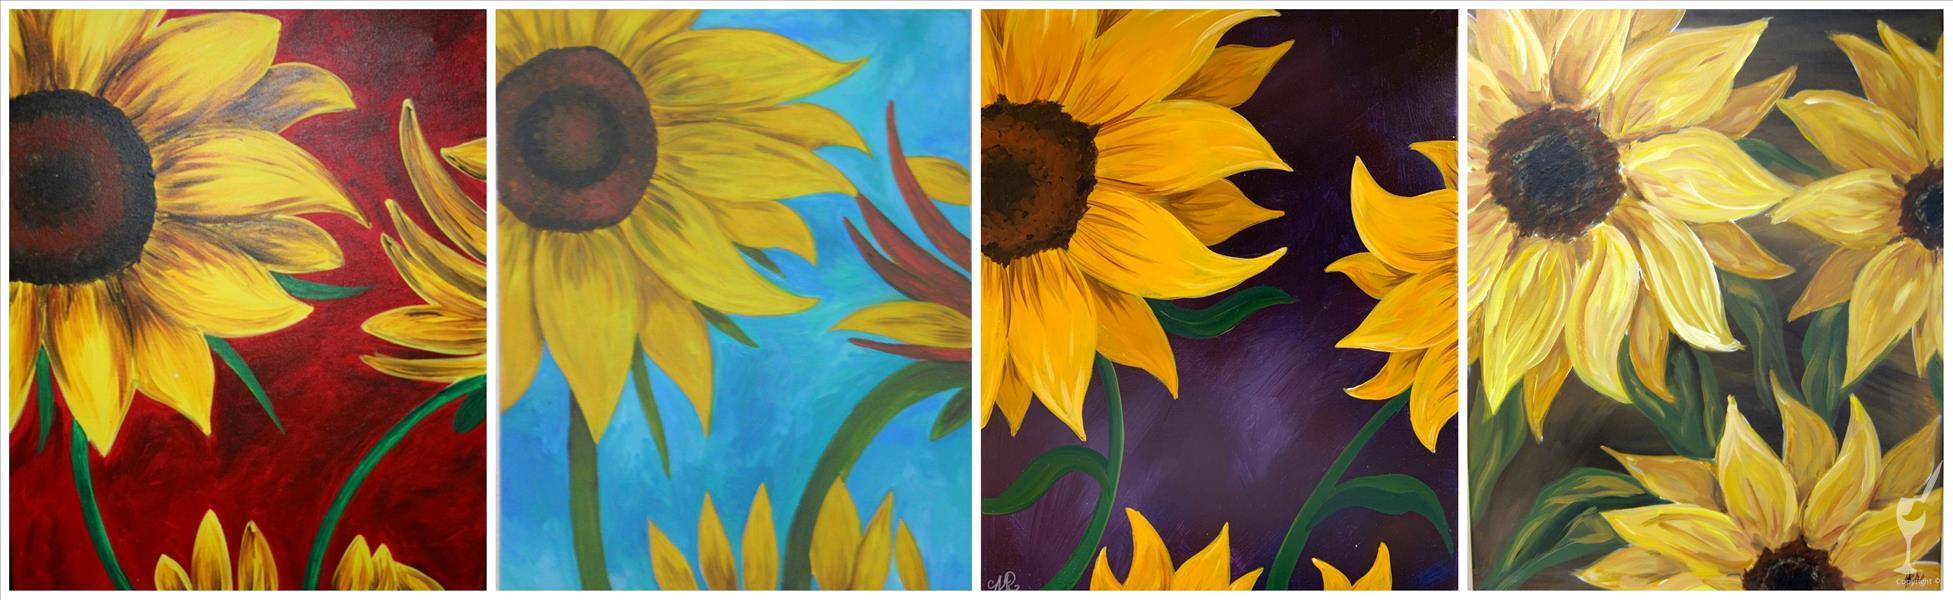 Sunflowers - PICK YOUR COLORS